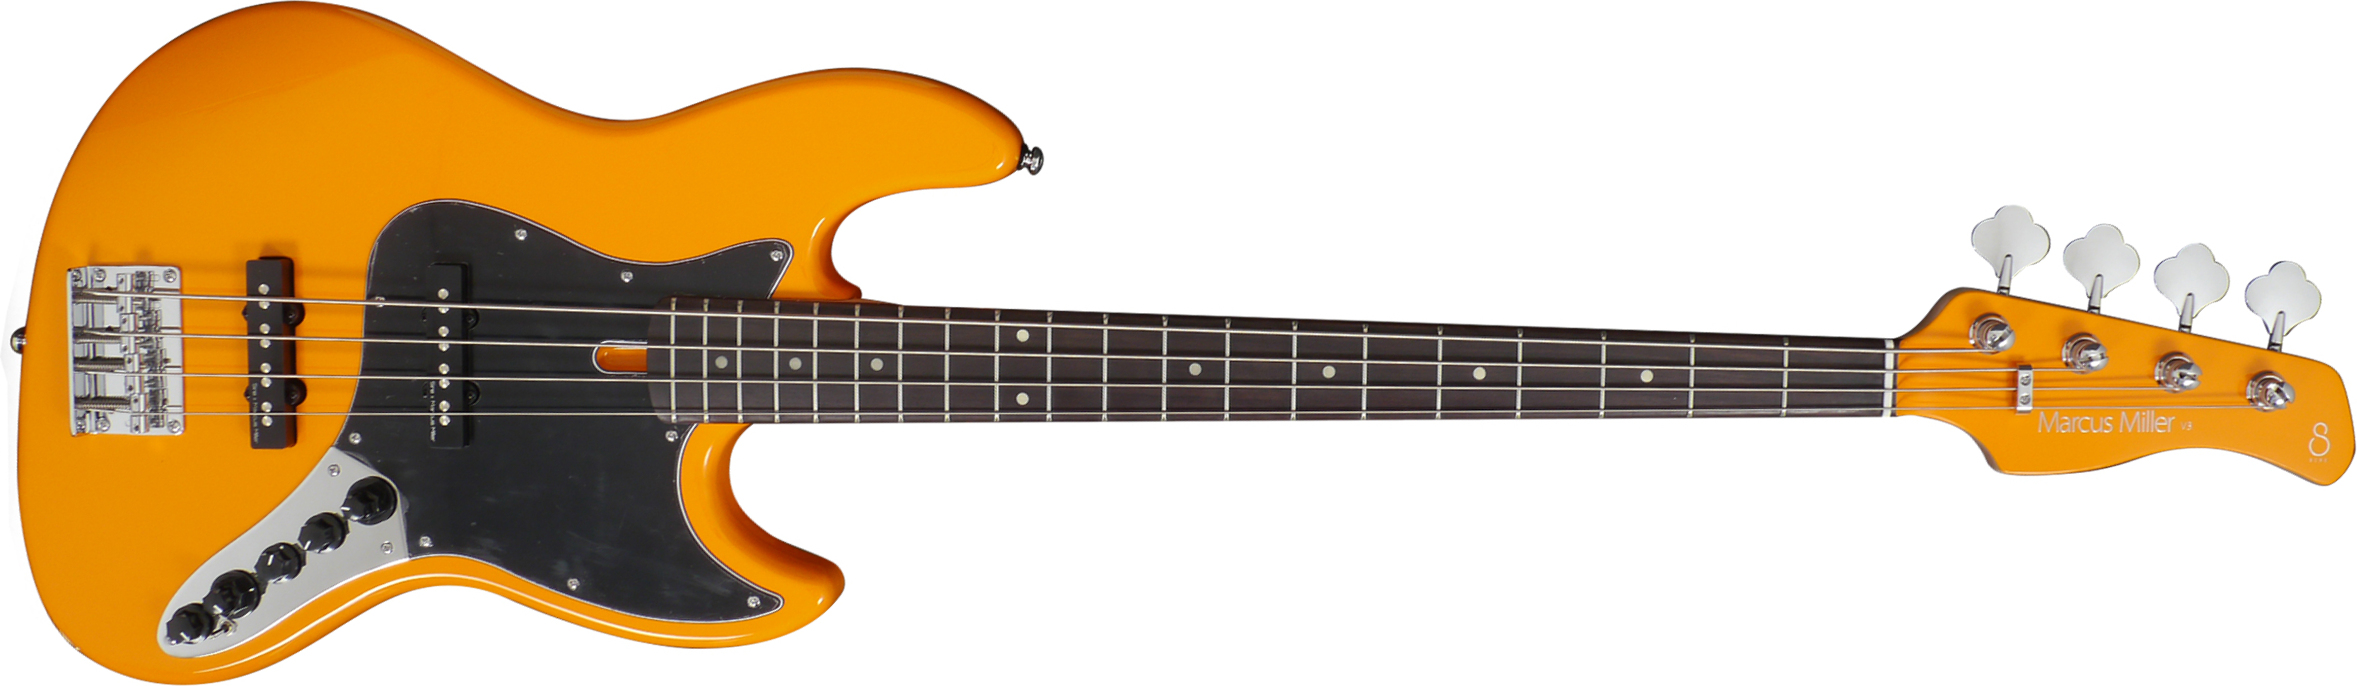 Marcus Miller V3 4st 2nd Generation Active Rw Sans Housse - Orange - Solid body electric bass - Main picture